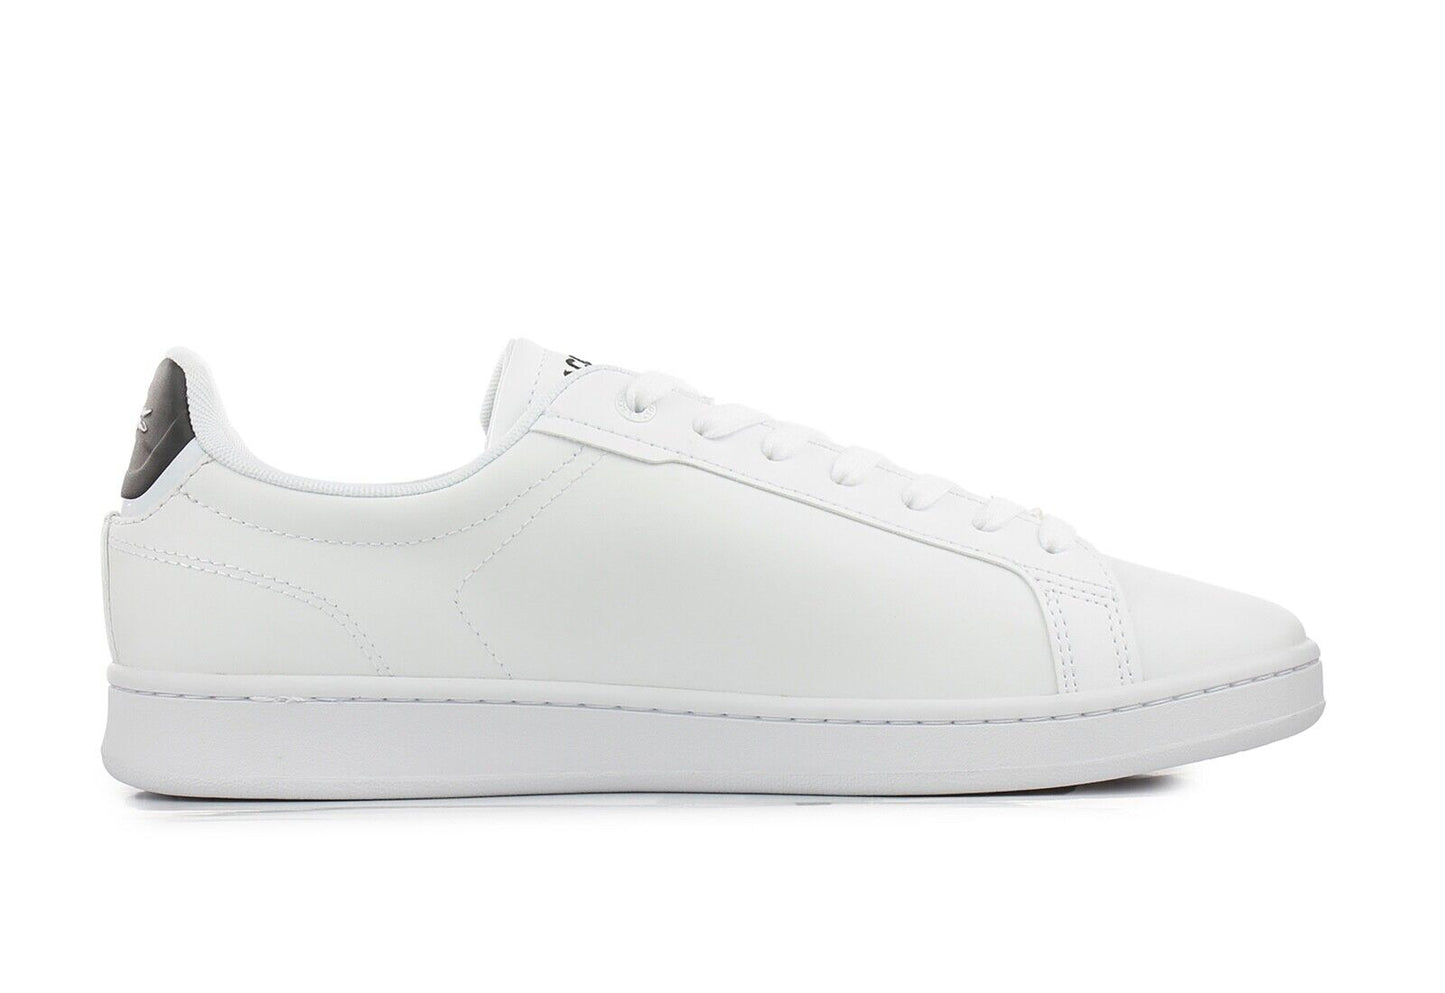 Lacoste Carnaby Pro 123 8 SMA Men’s Trainers in White and Black 745SMA0111147